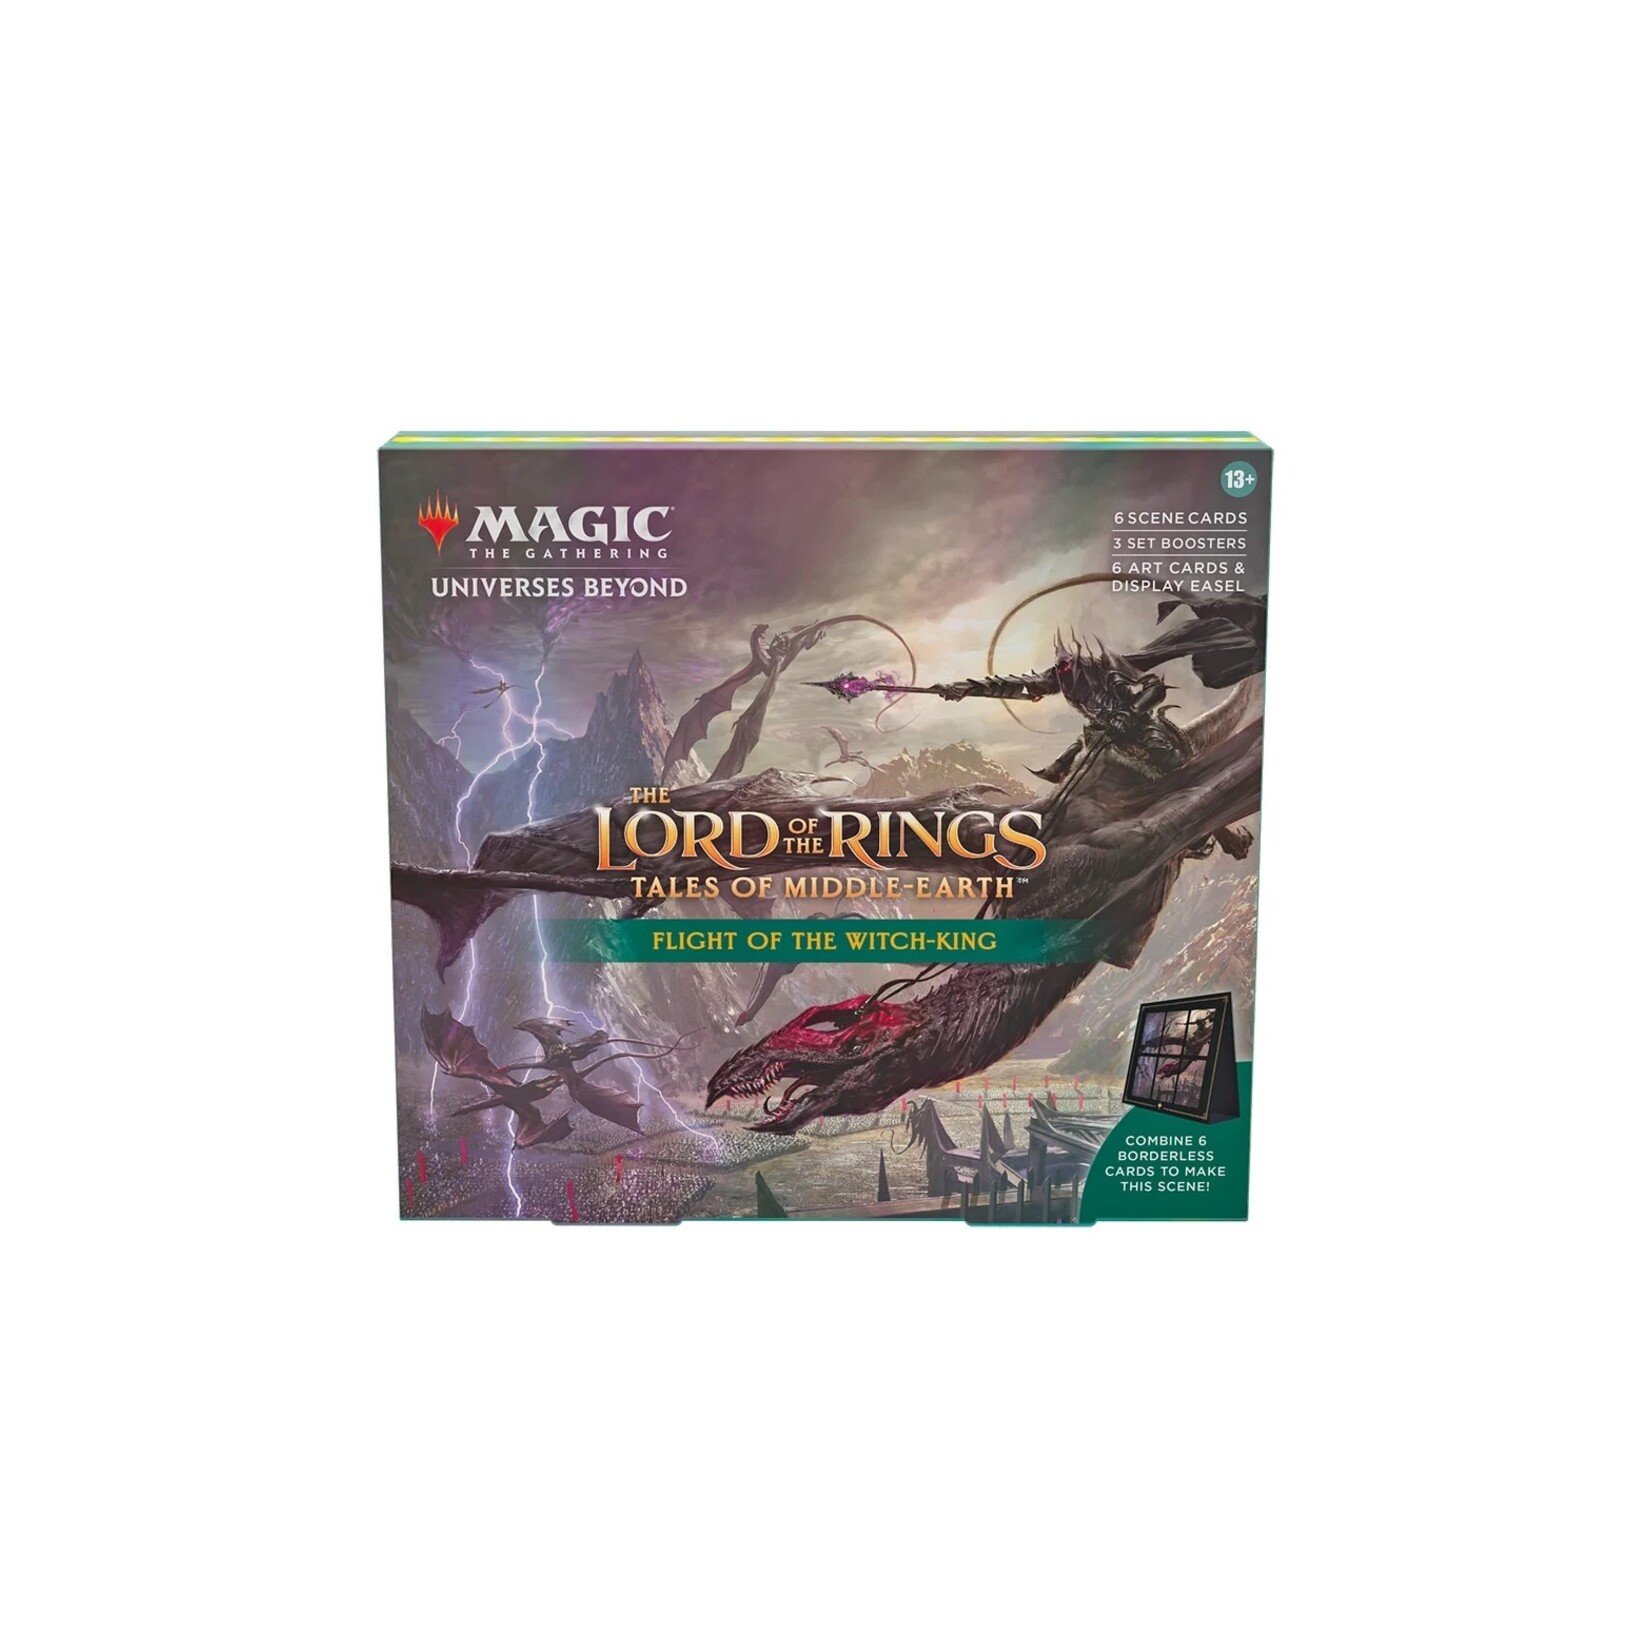 Wizard of the coast Magic the gathering - The lord of the rings - Tales of middle-earth - Flight of the witch king